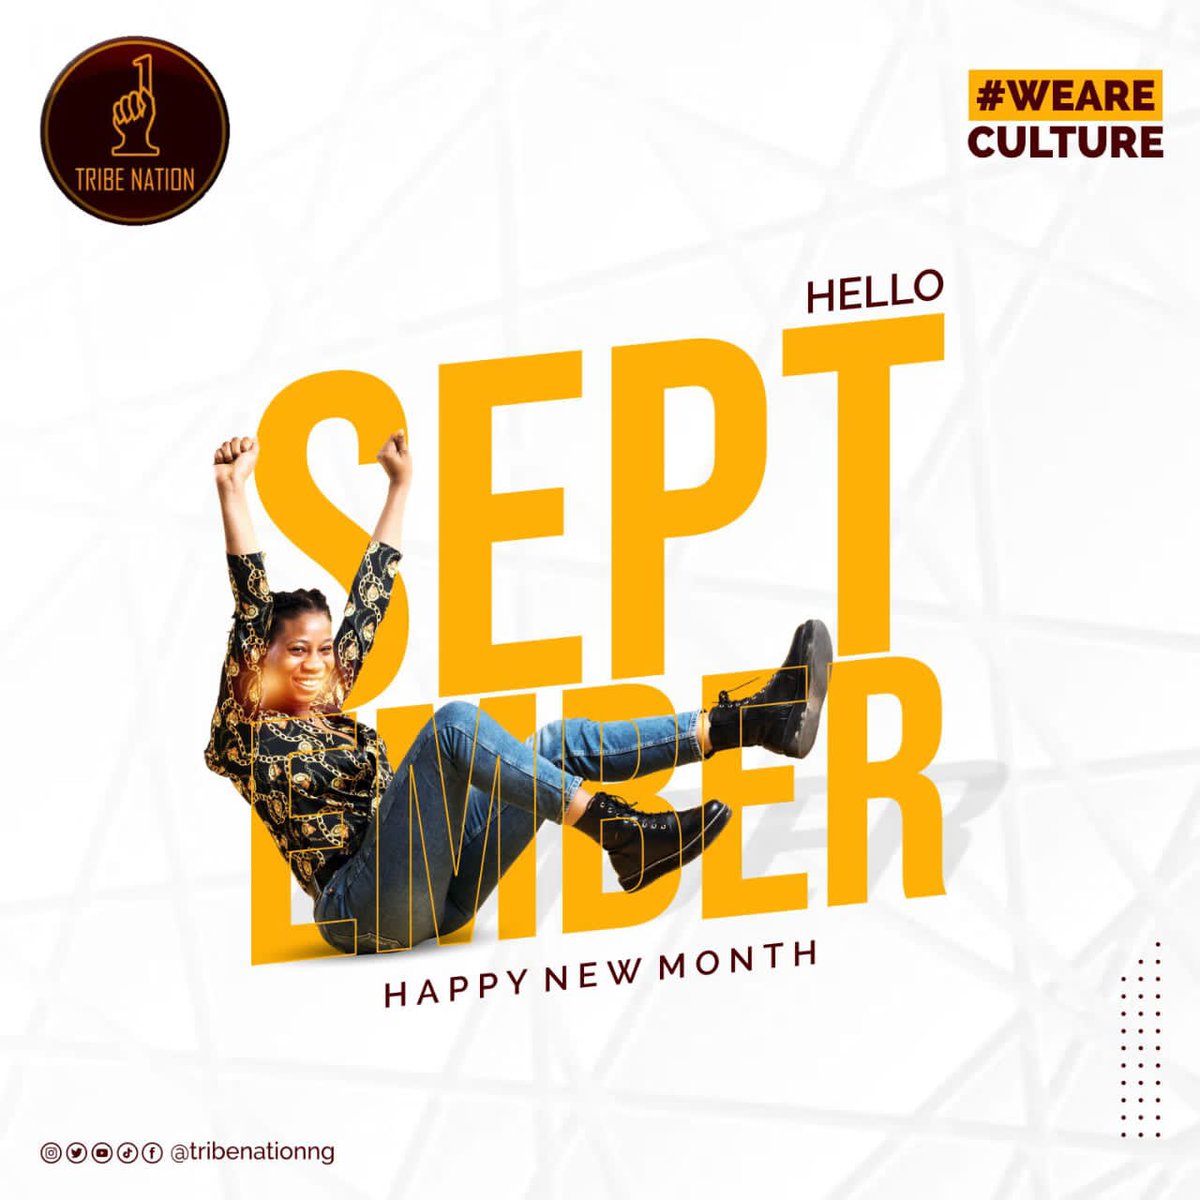 Here's to new beginnings and opportunities. Happy New Month from all of us at Tribe Nation Entertainment. 

#september #tribenation #weareculture